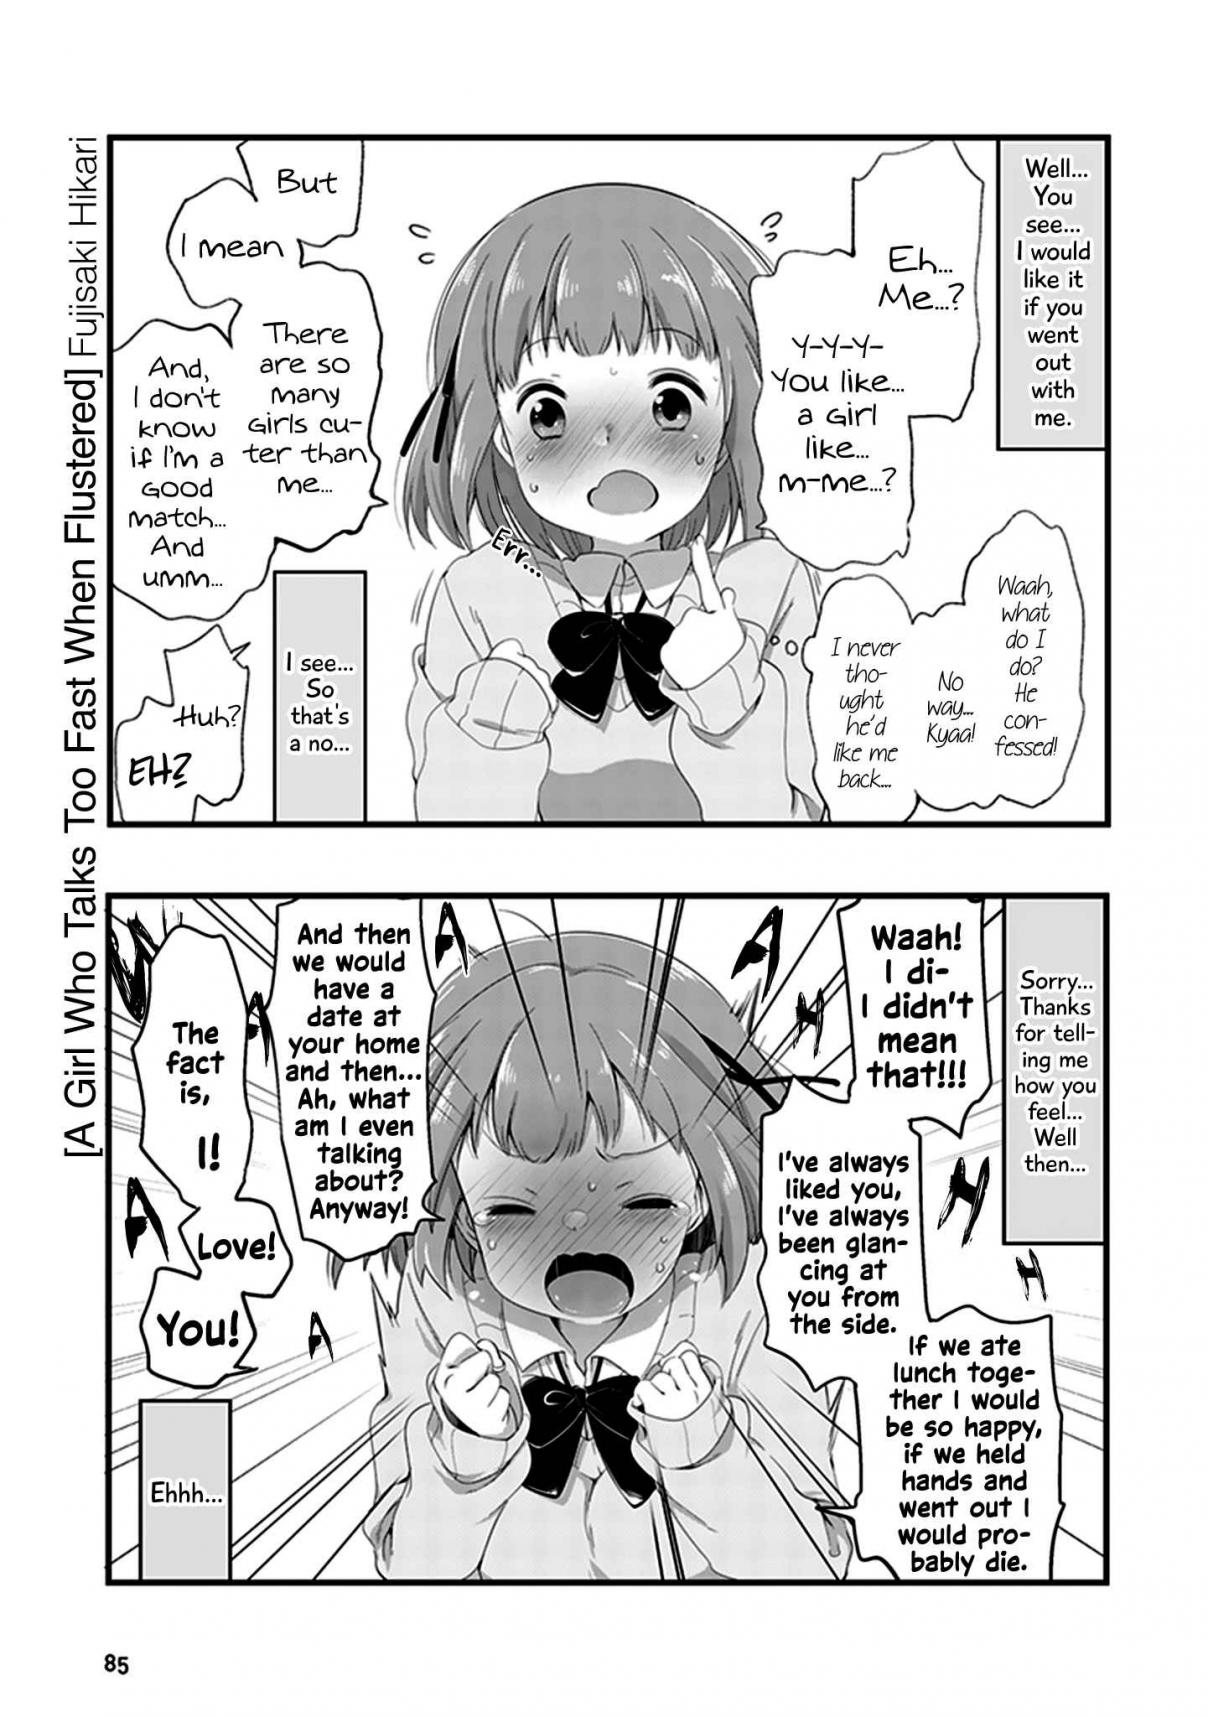 I Want to Hug a Girl Like This! Short Stories Vol. 1 Ch. 24 A Girl Who Talks Too Fast When Flustered [by Fujisaki Hikari]